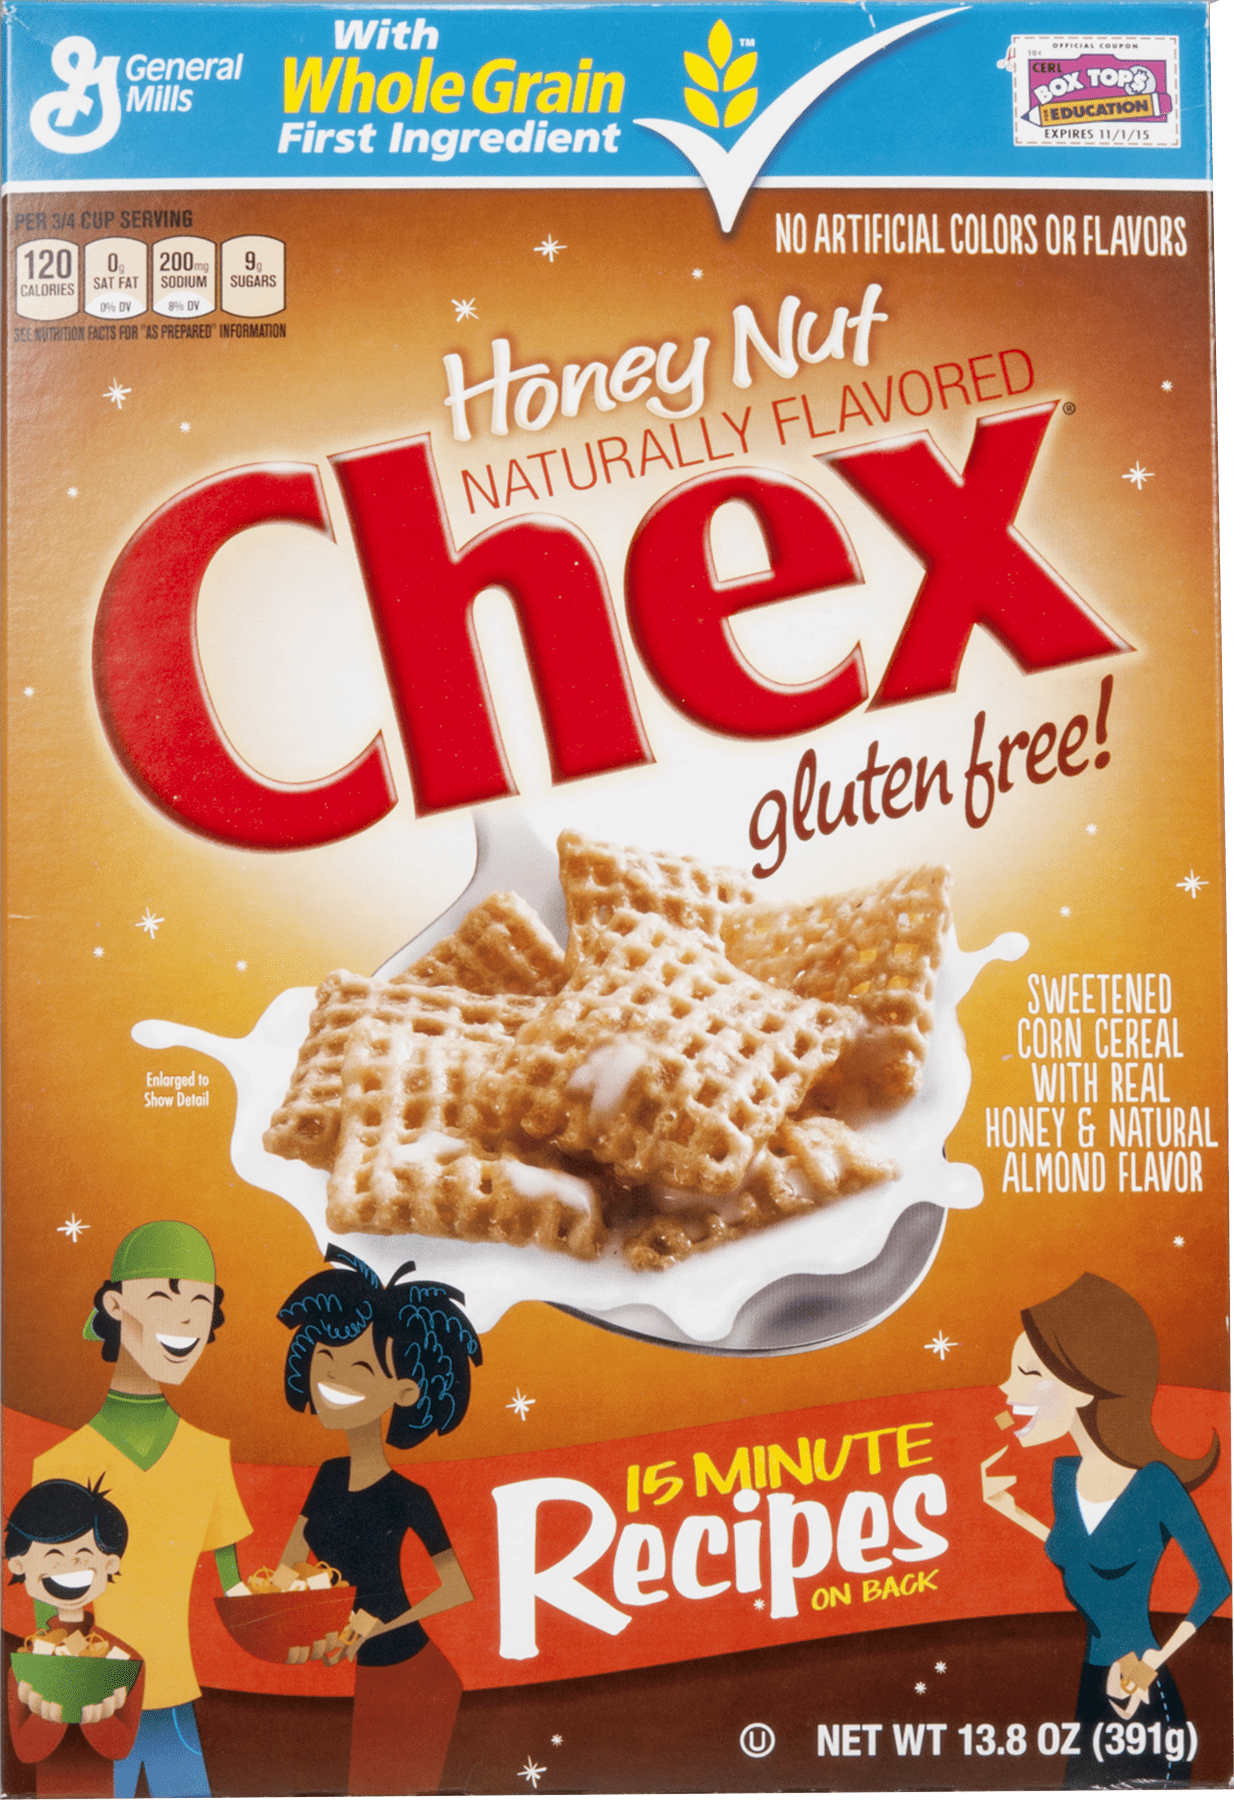 Chex Honey Nut Cereal, 395g/13.9oz, (Imported from Canada)